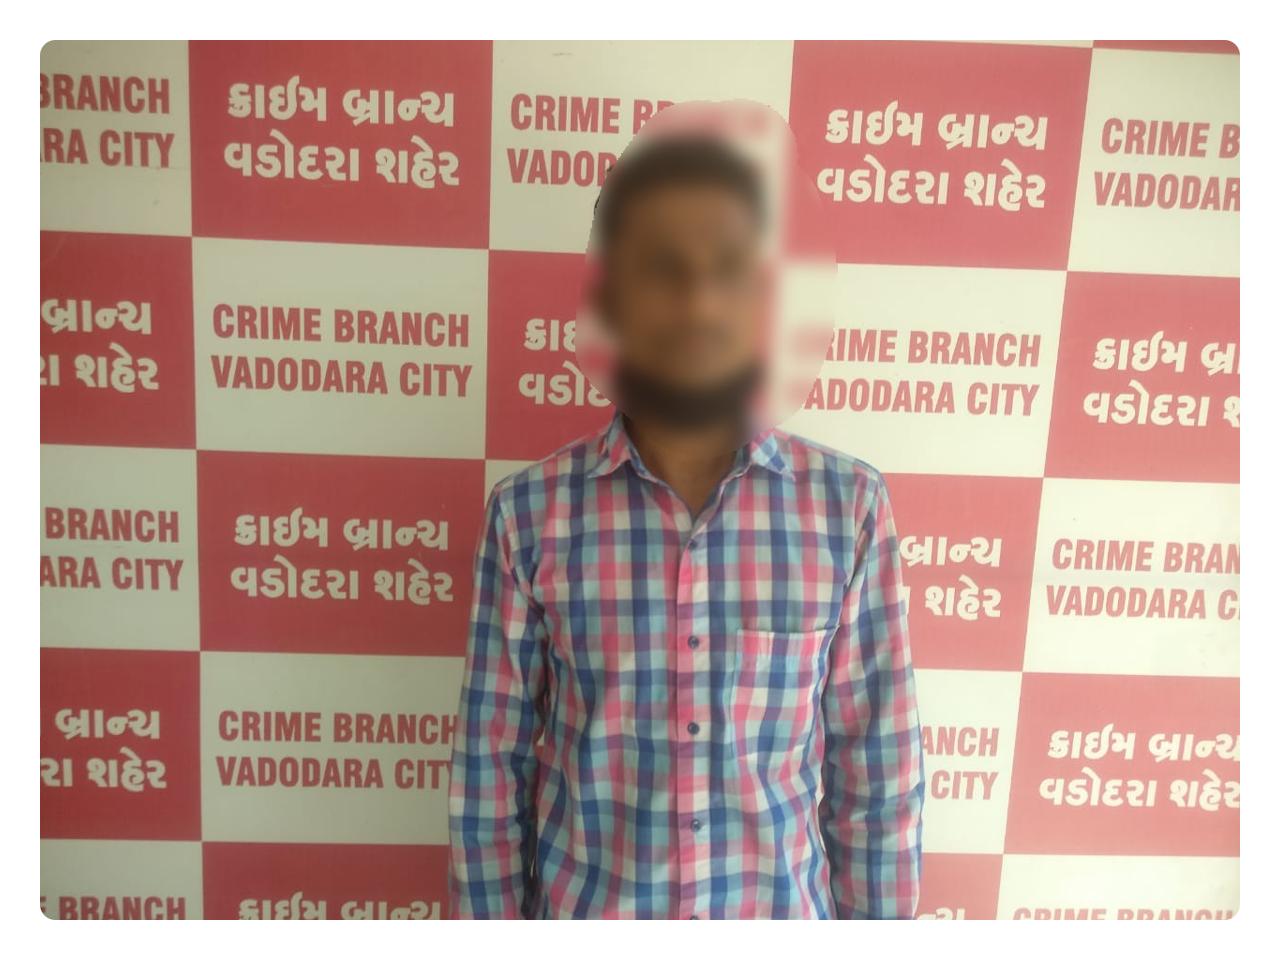 Vadodara city cyber crime arrested one for sending obscene messages to a woman